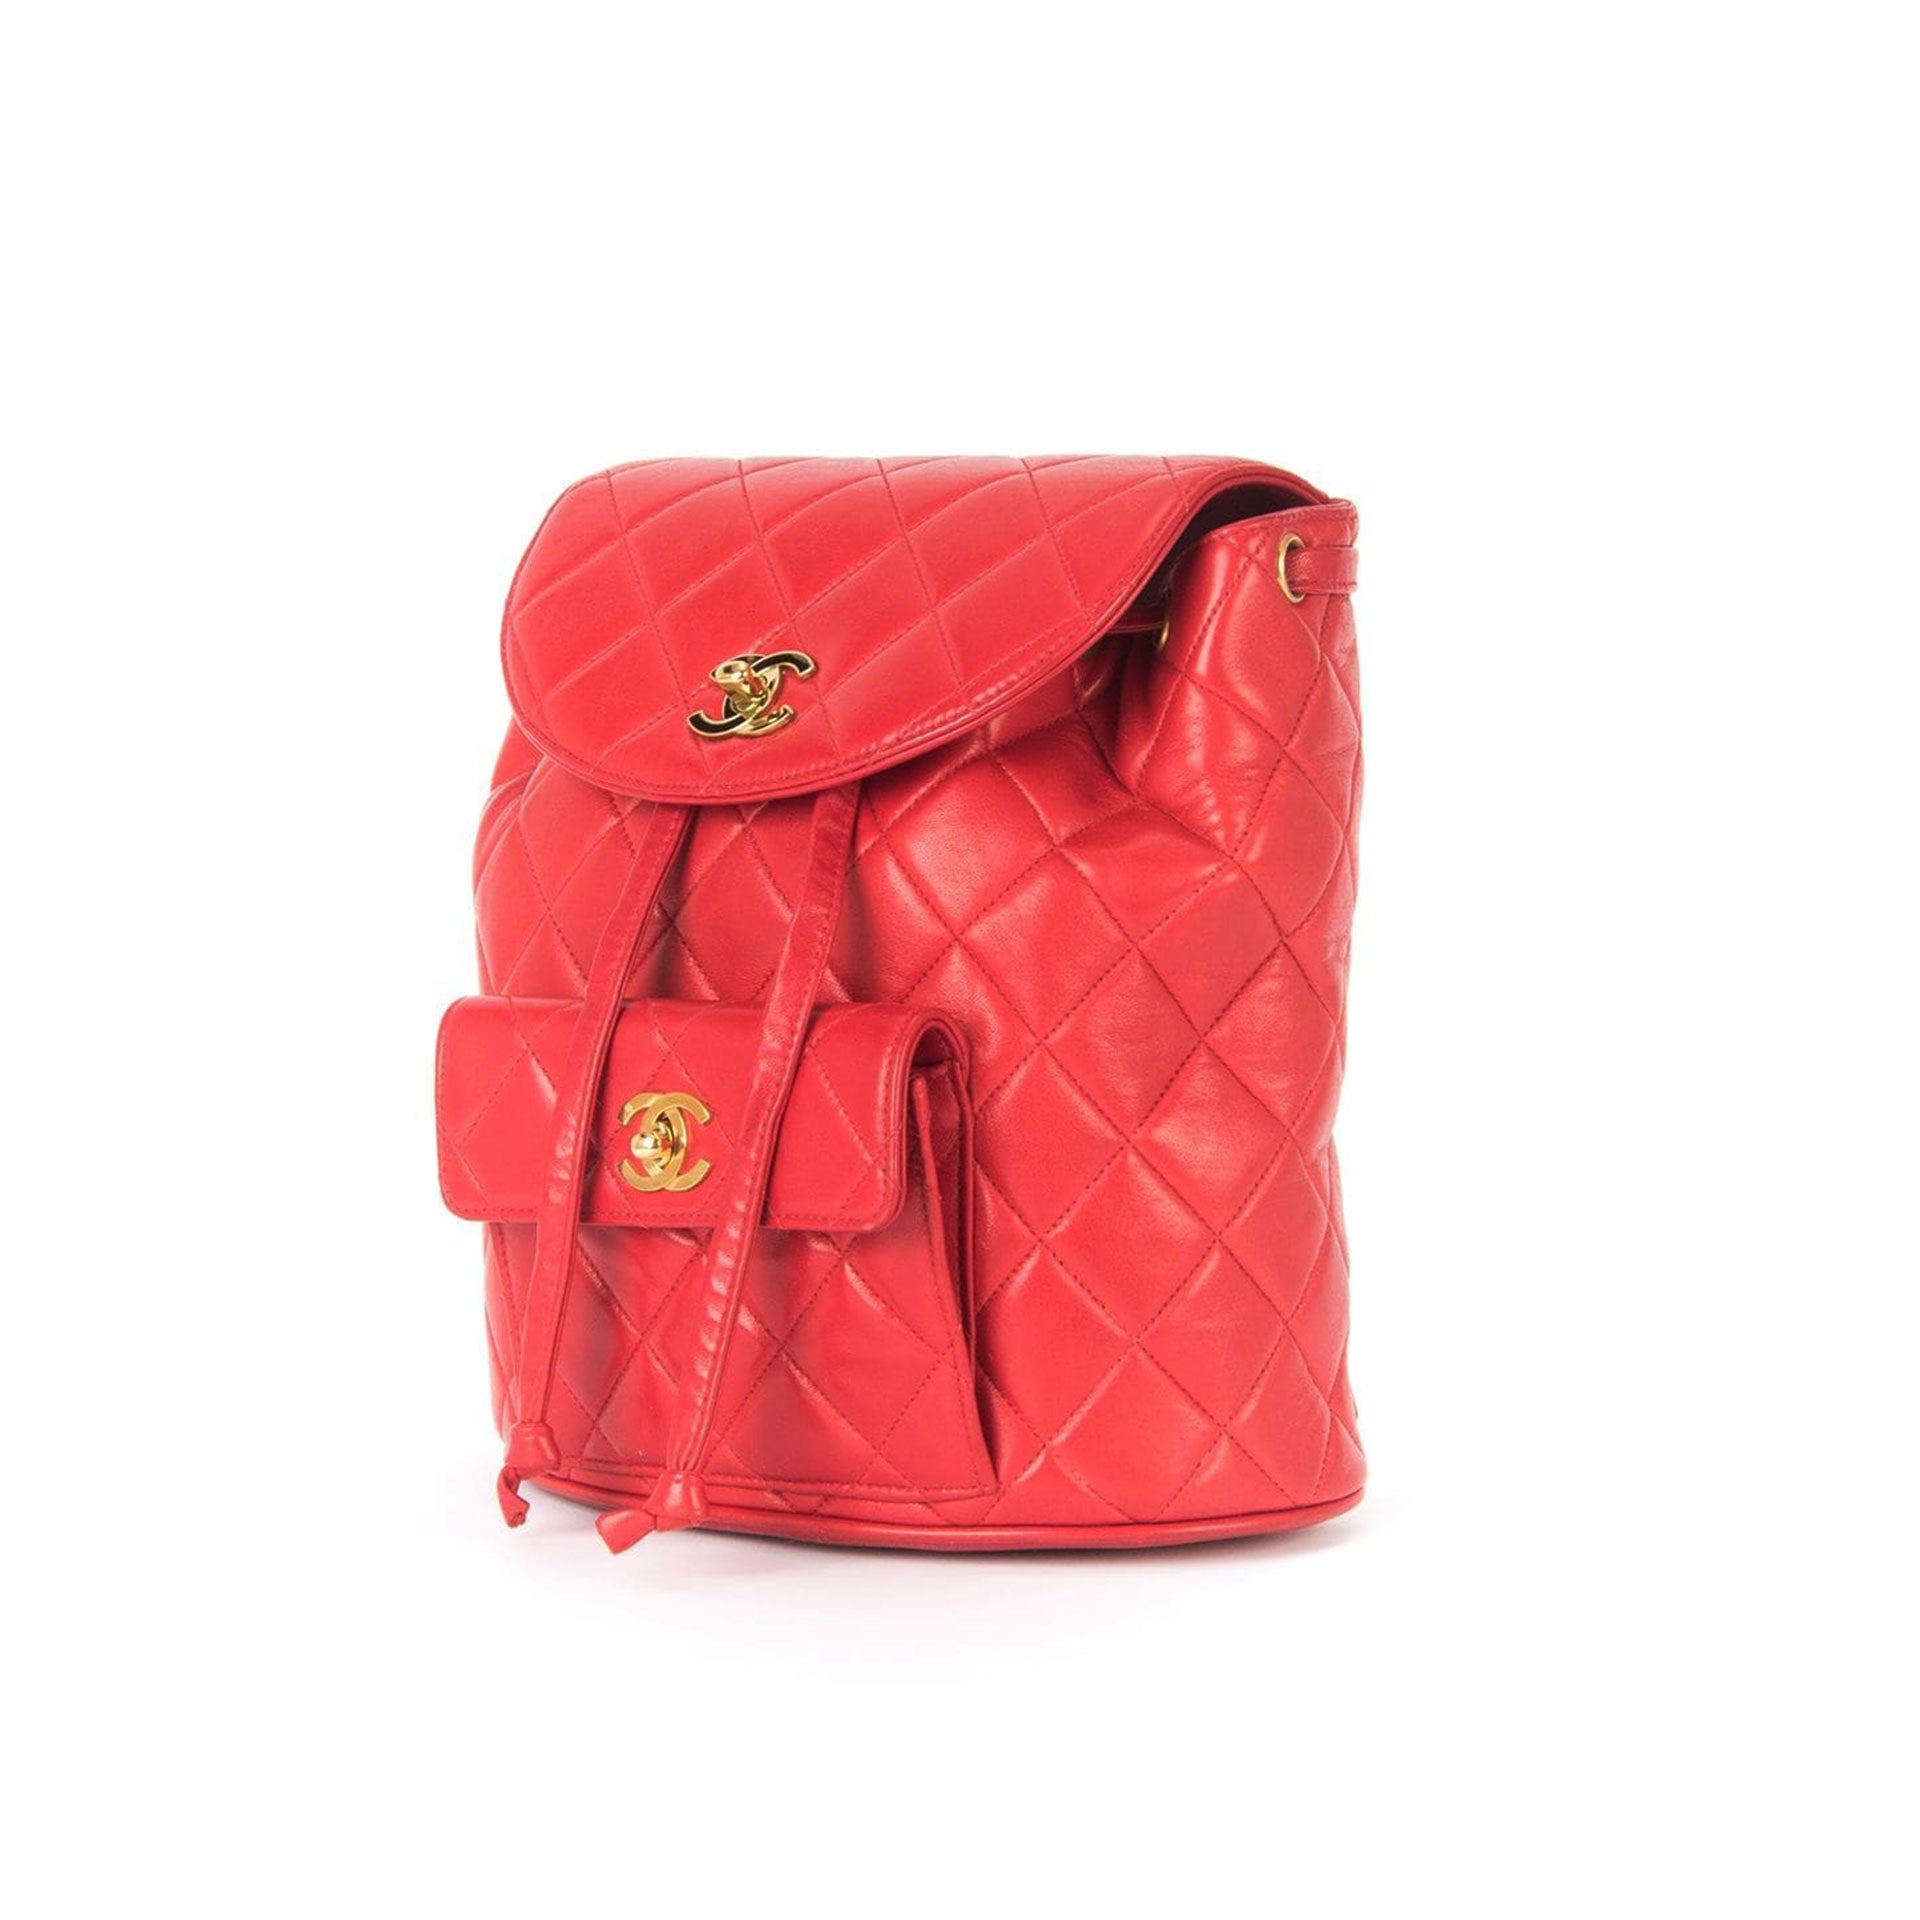 CHANEL CHANEL Rucksack Backpack bag Plastics Red Gray SHW Used CC